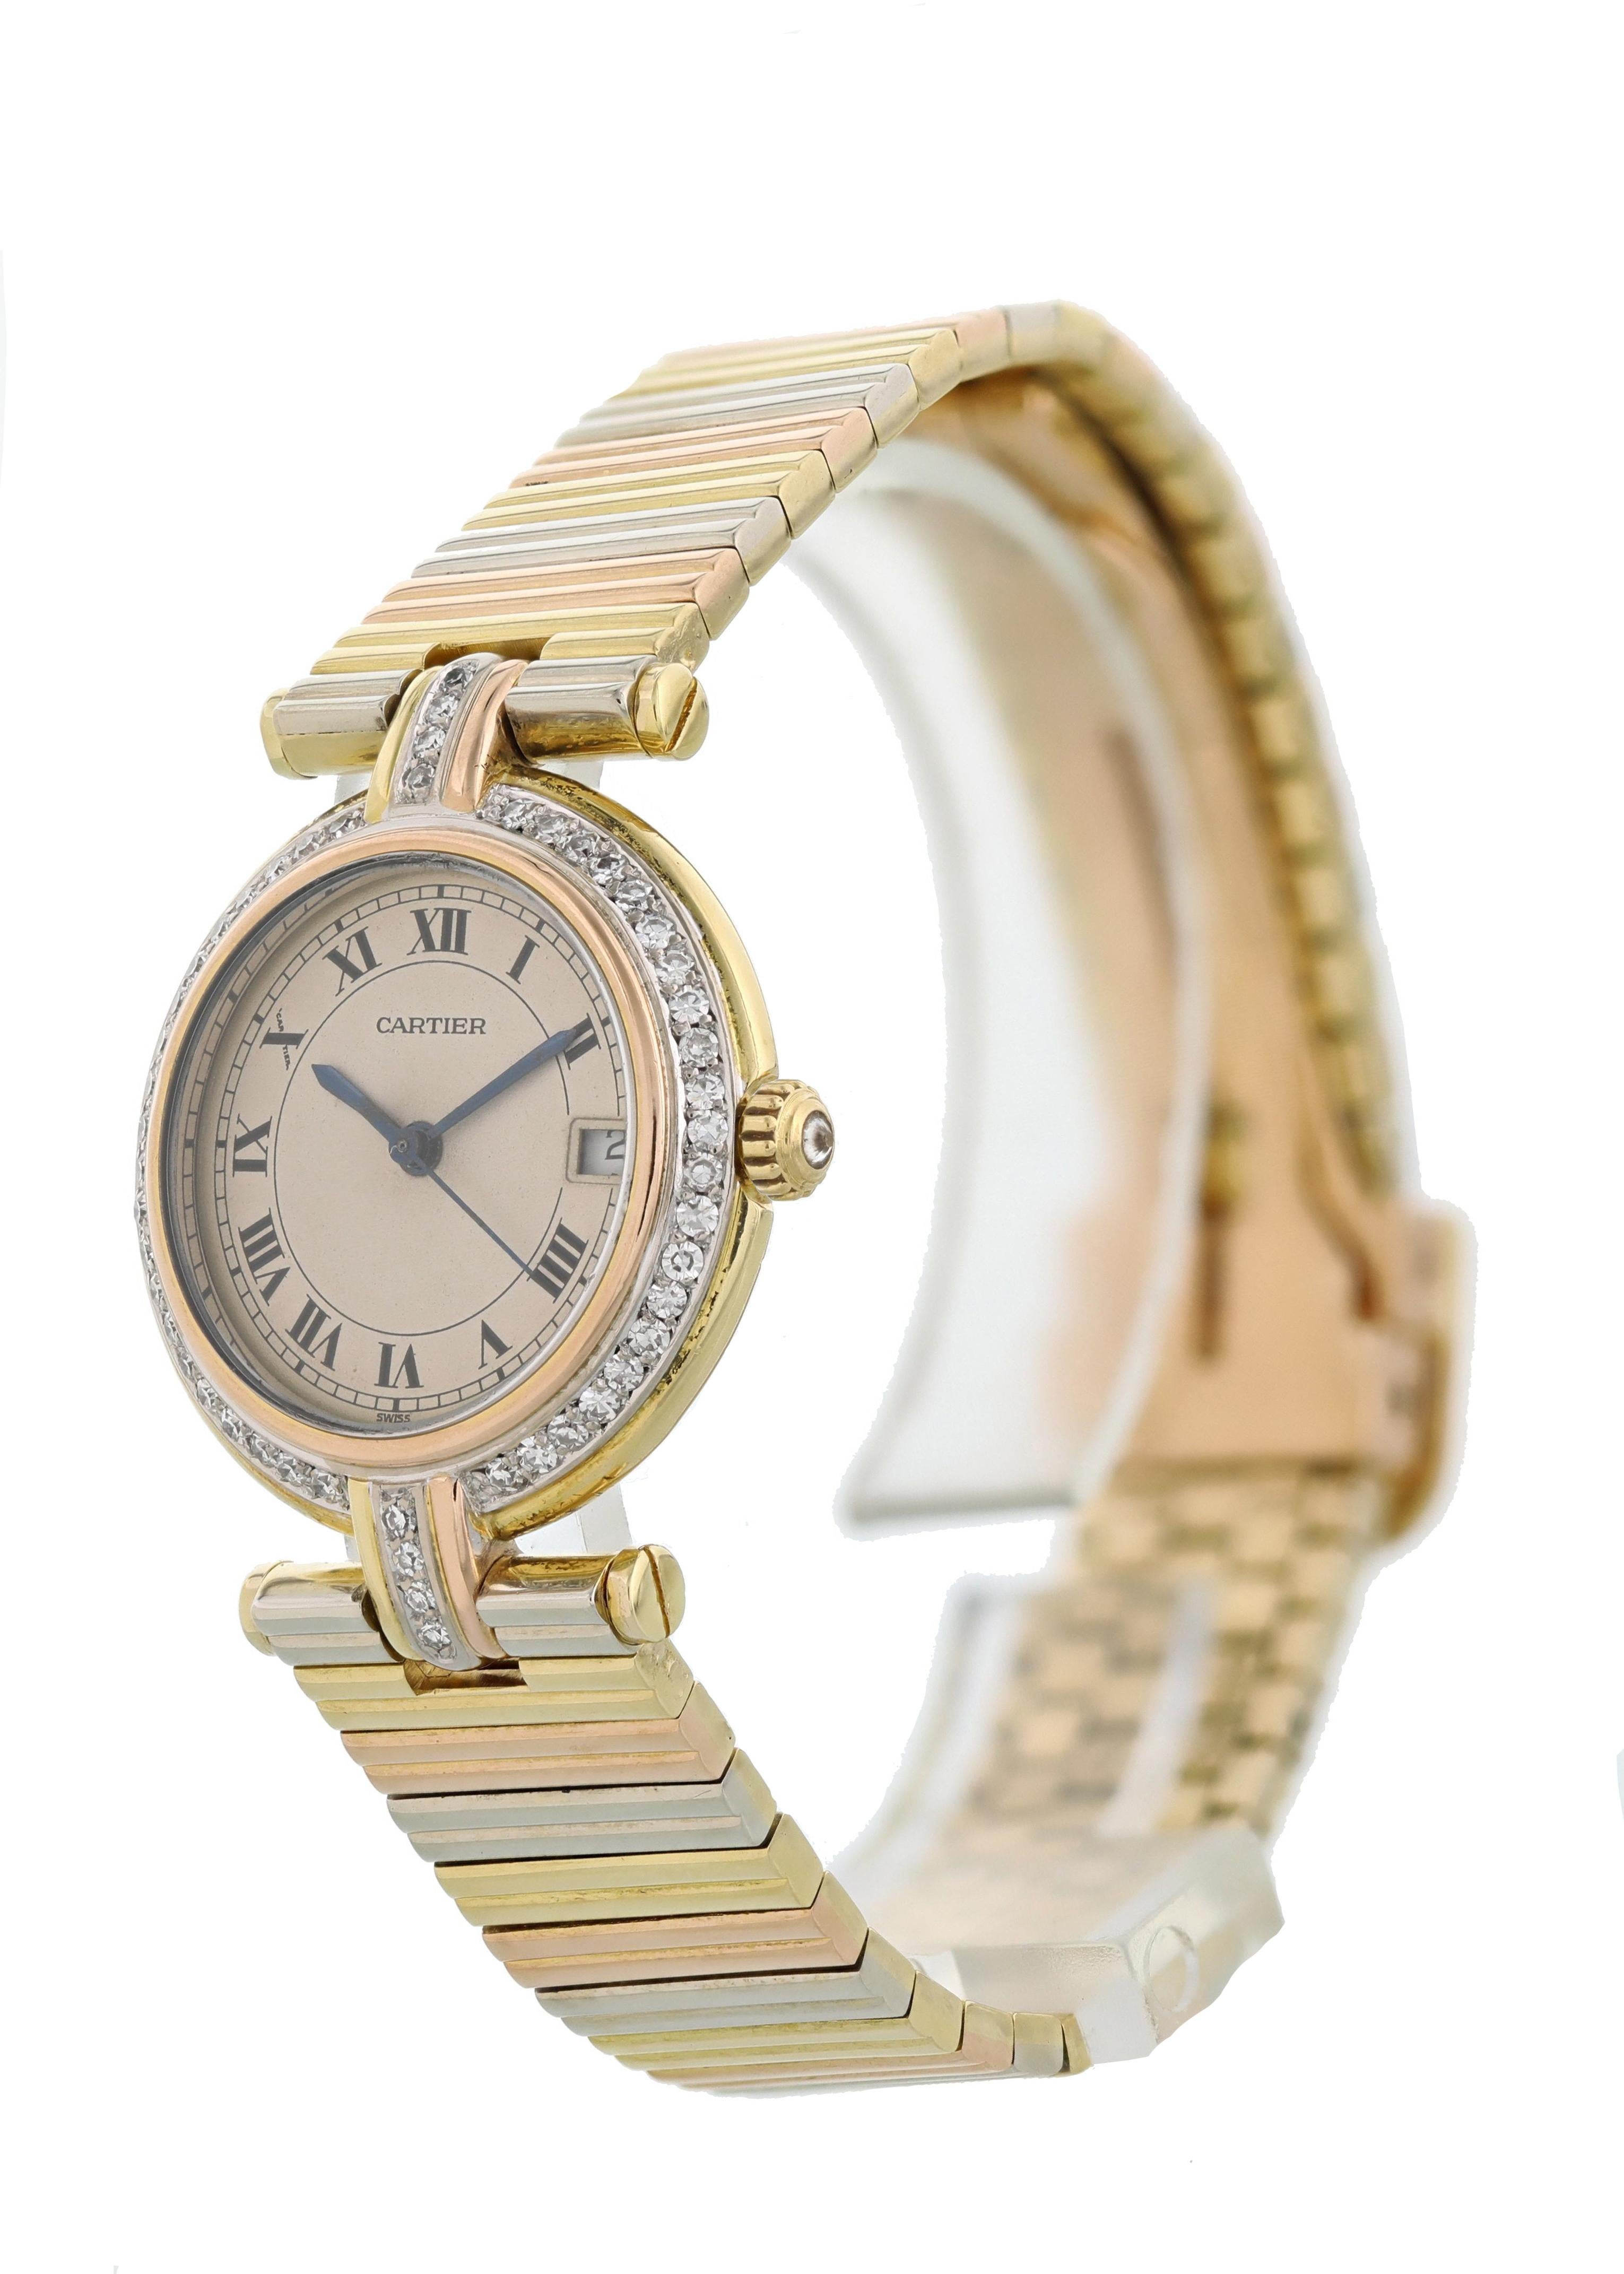 Cartier Trinity Vendome 18k Ladies Watch. 26mm 18 yellow gold case with Factory placed diamonds and a rose gold bezel. Off white dial with blue steel hands and Roman numeral hour markers Minute markers around the outer dial. Date display at the 3